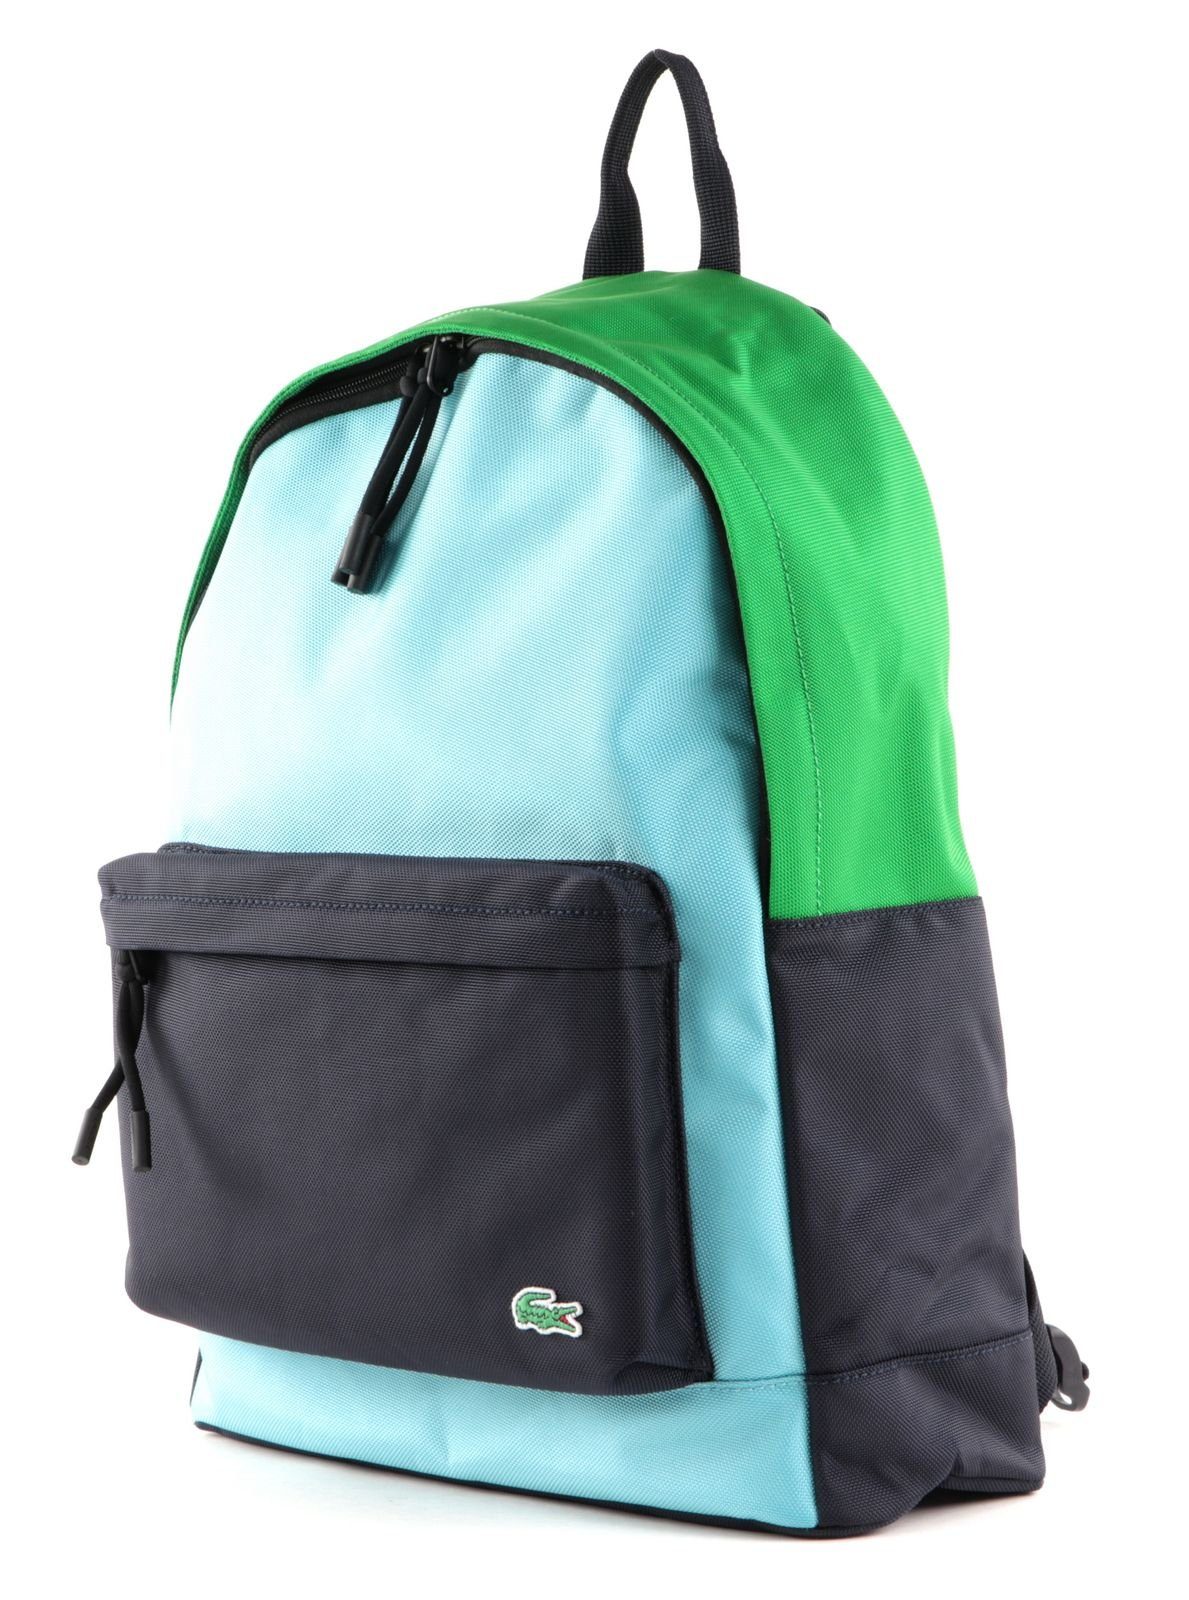 Rucksack Package Azur Holiday Abime Malachite Lacoste